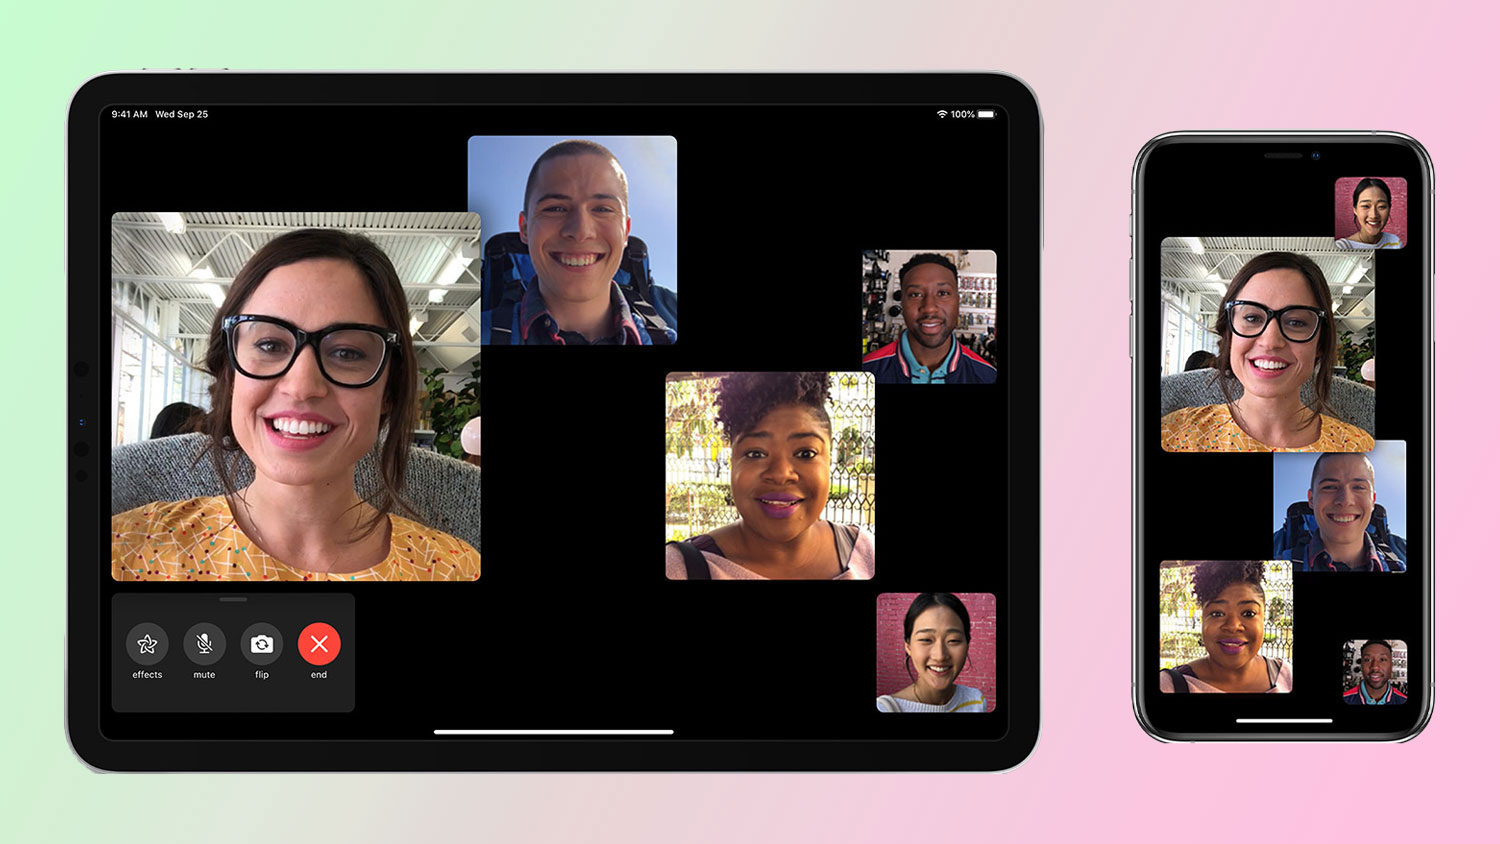 How to Mute Audio & Pause the Video in a FaceTime Call.